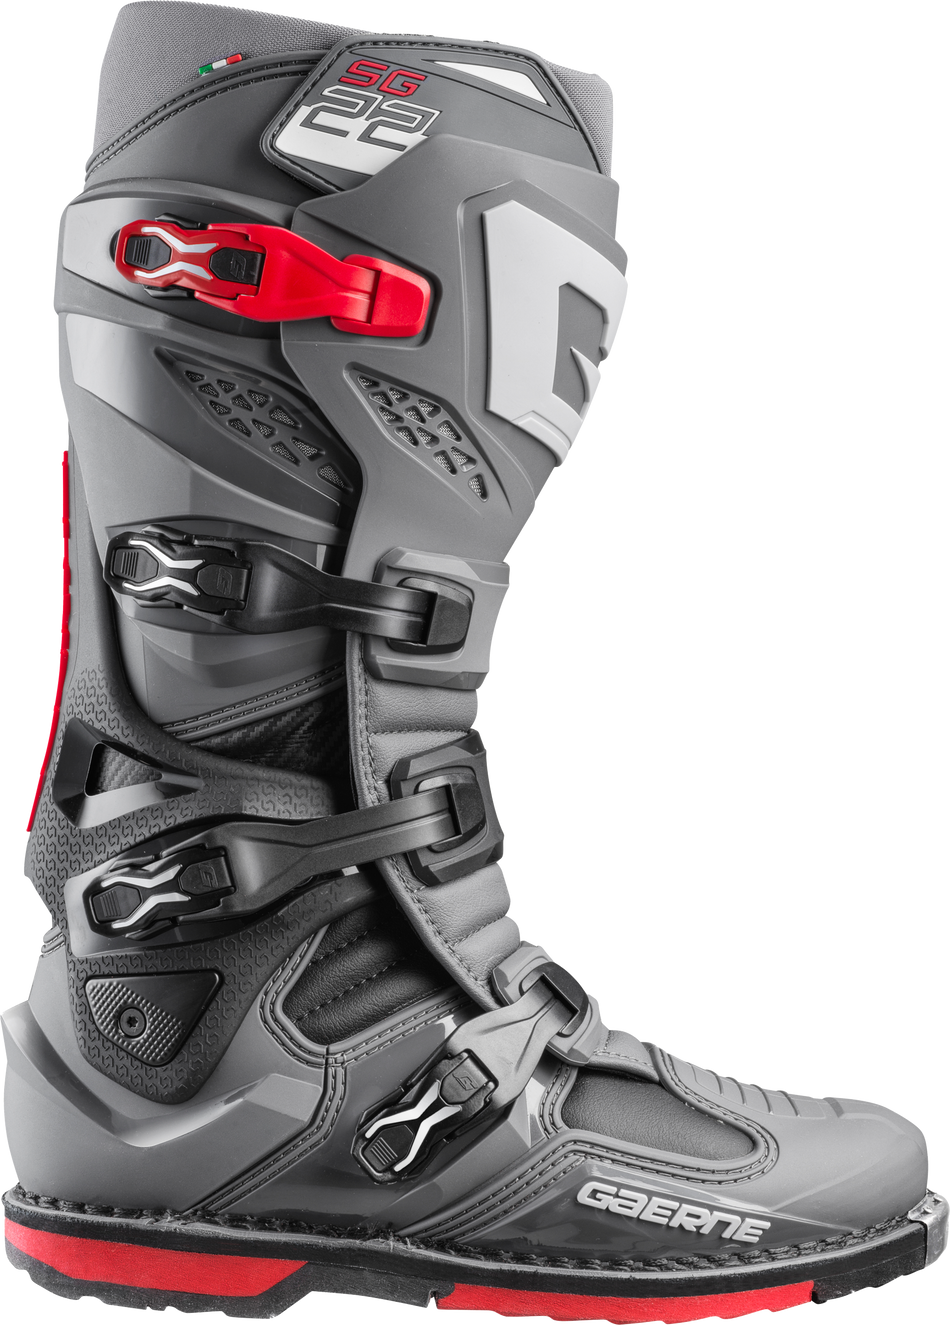 GAERNE Sg-22 Boots Anthracite/Black/Red Sz 14 2262-007-14